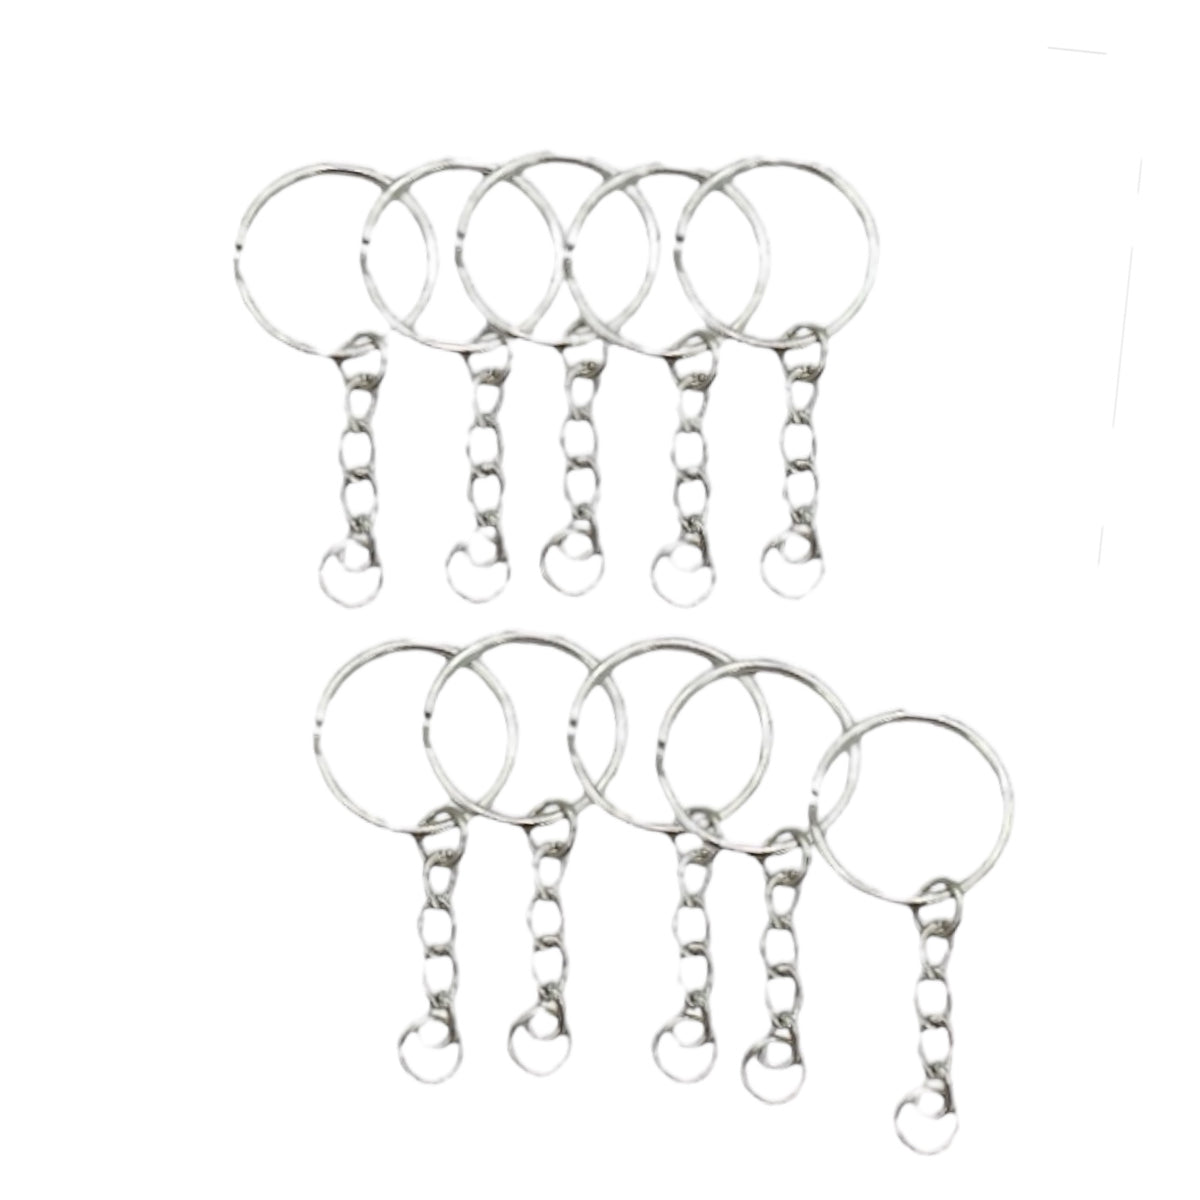 10 Pack of Keychain Rings With Jump Rings included